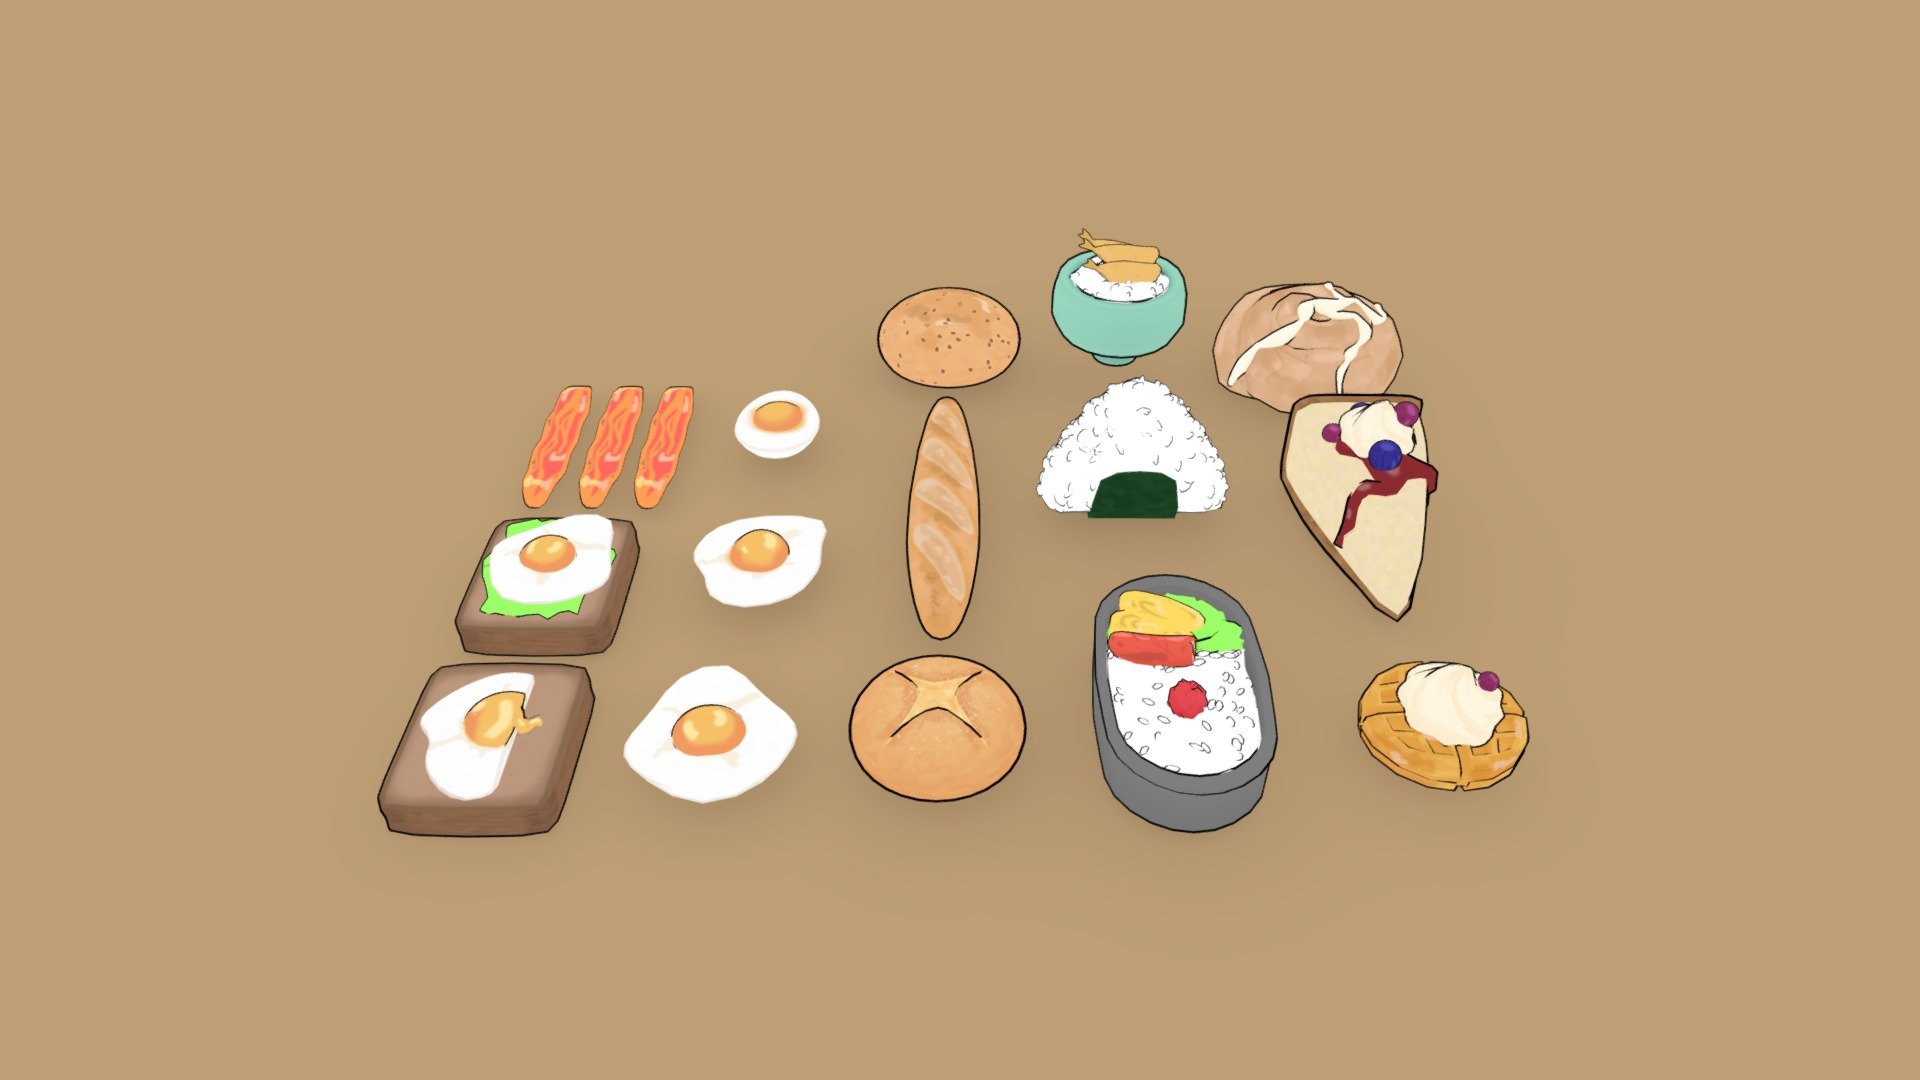 Several foods made in a cartoon/ghibli inspired style :)
vertices count doubled for toon shading - Cartoon Foods Pack - 3D model by pea ꕤ (@3dchickpea) 3d model